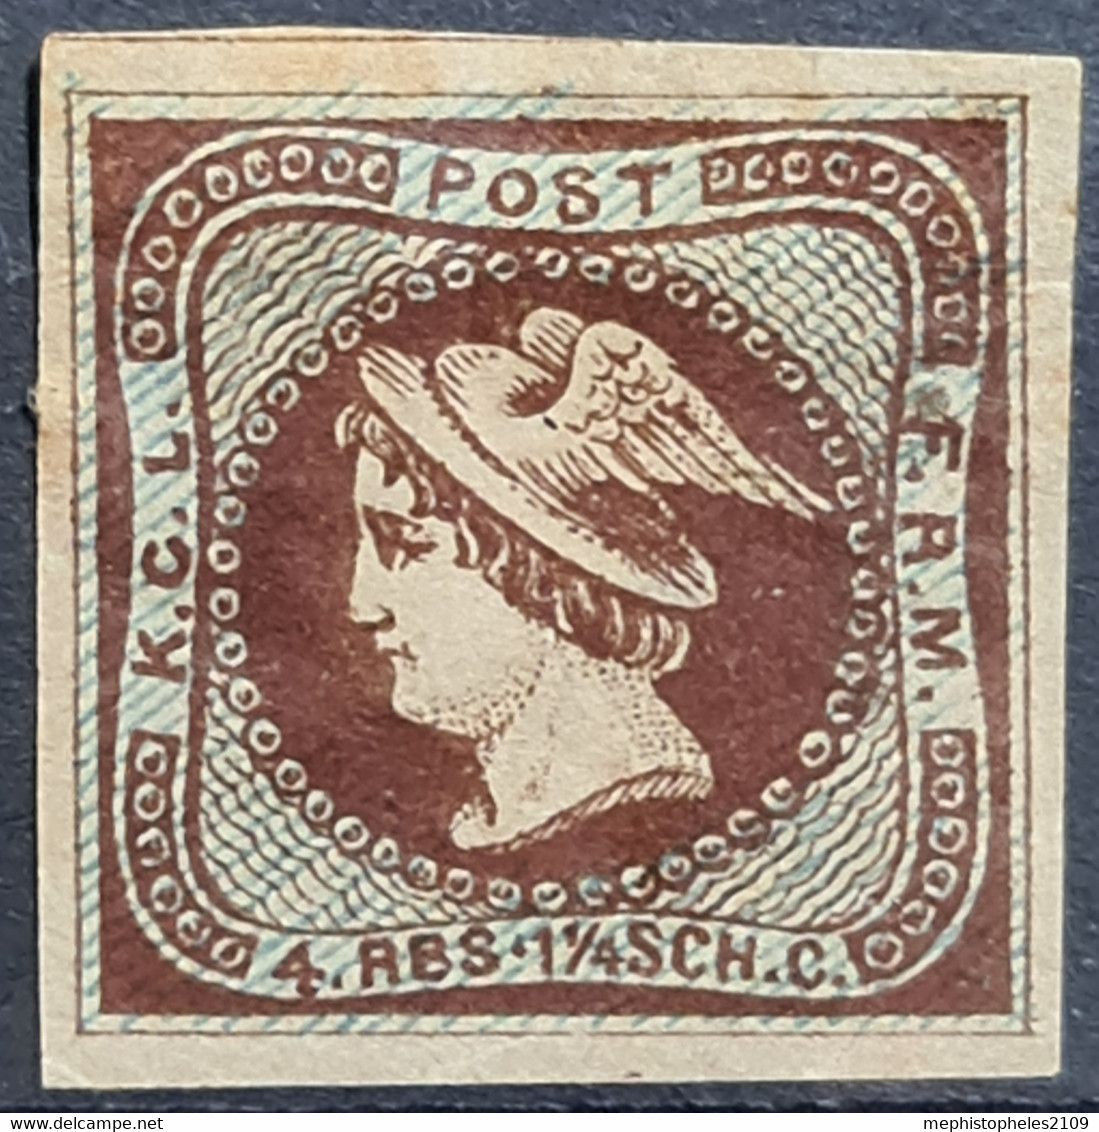 DENMARK 1852 (60?) - MLH - Reproduction Of A 1852 Ferslew Essay Or Forgery The 1860 Essay - Essais & Réimpressions